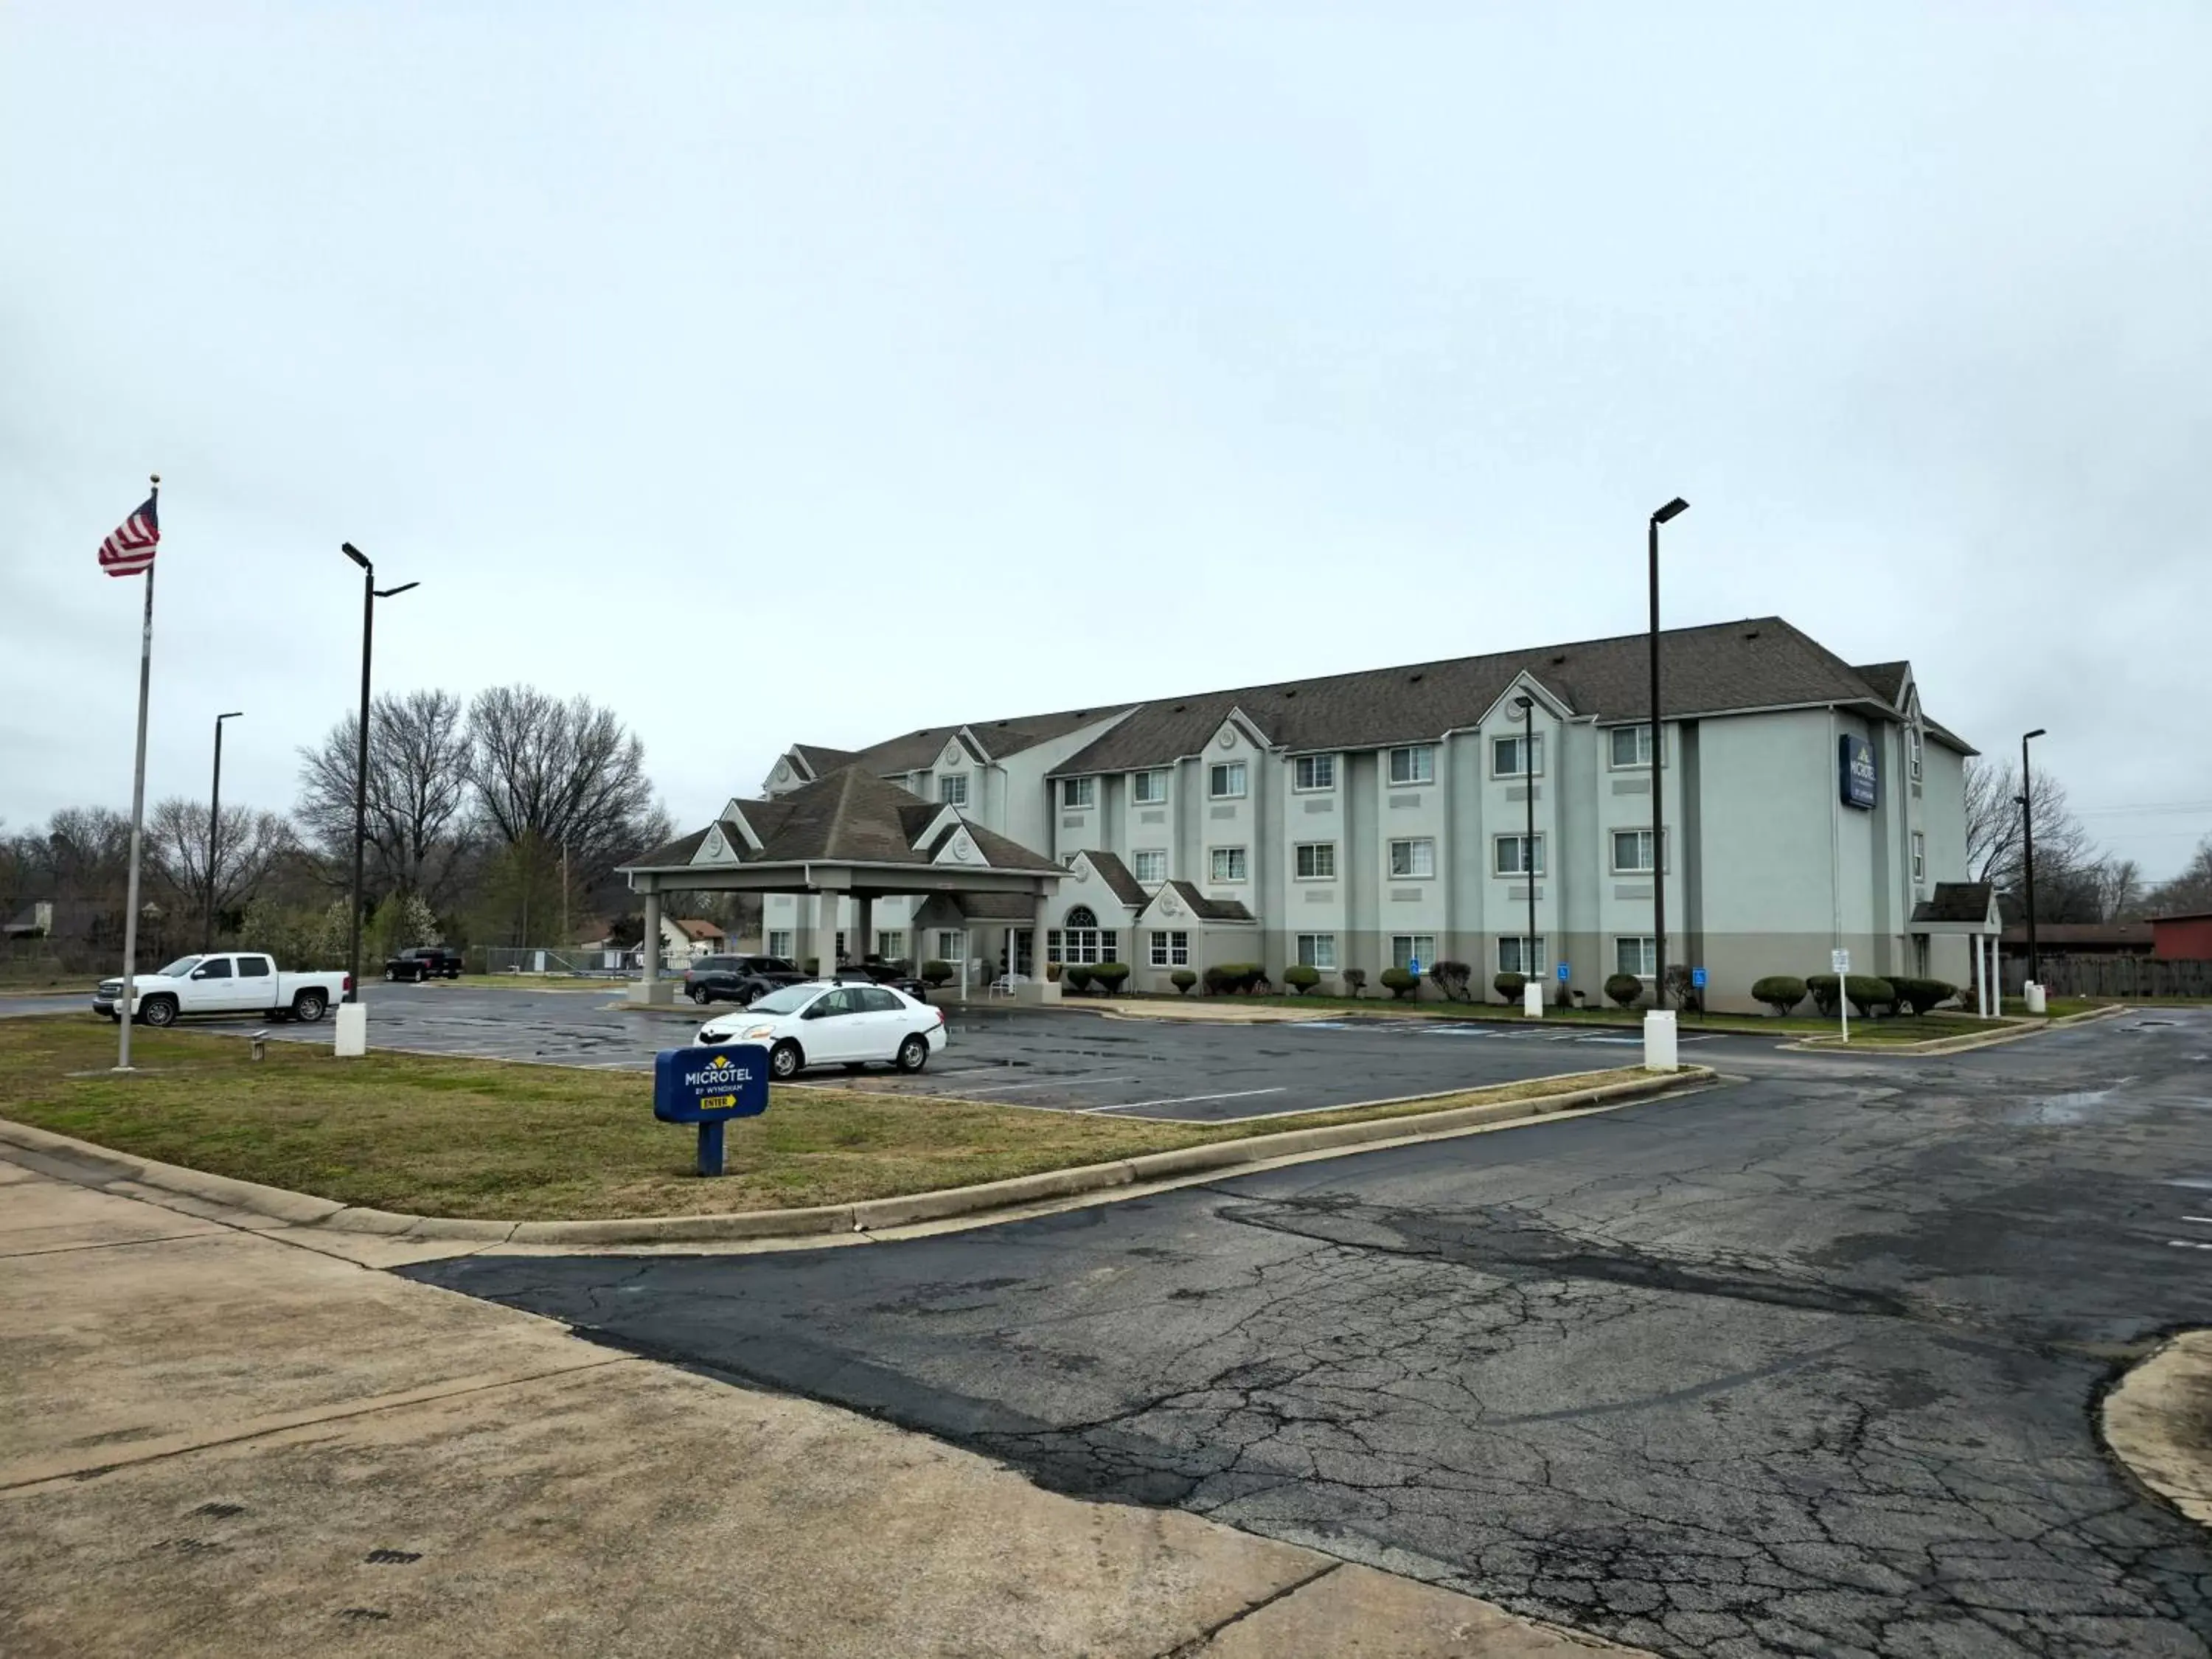 Property Building in Microtel Inn & Suites Claremore